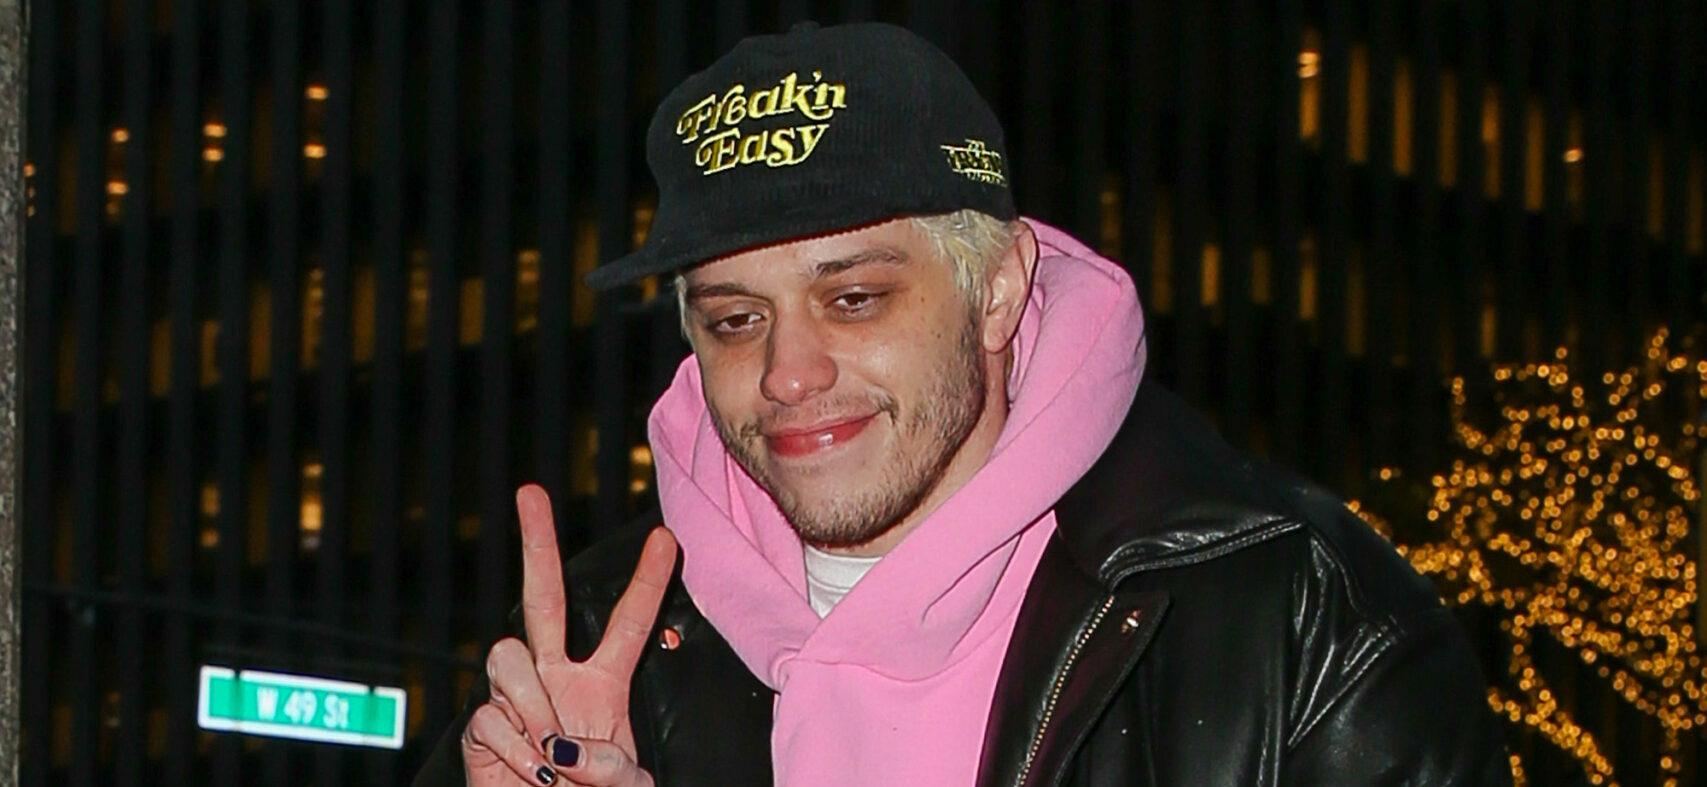 The Beverly Hills Home Pete Davidson Drove Into Has Been Demolished After He Was Charged